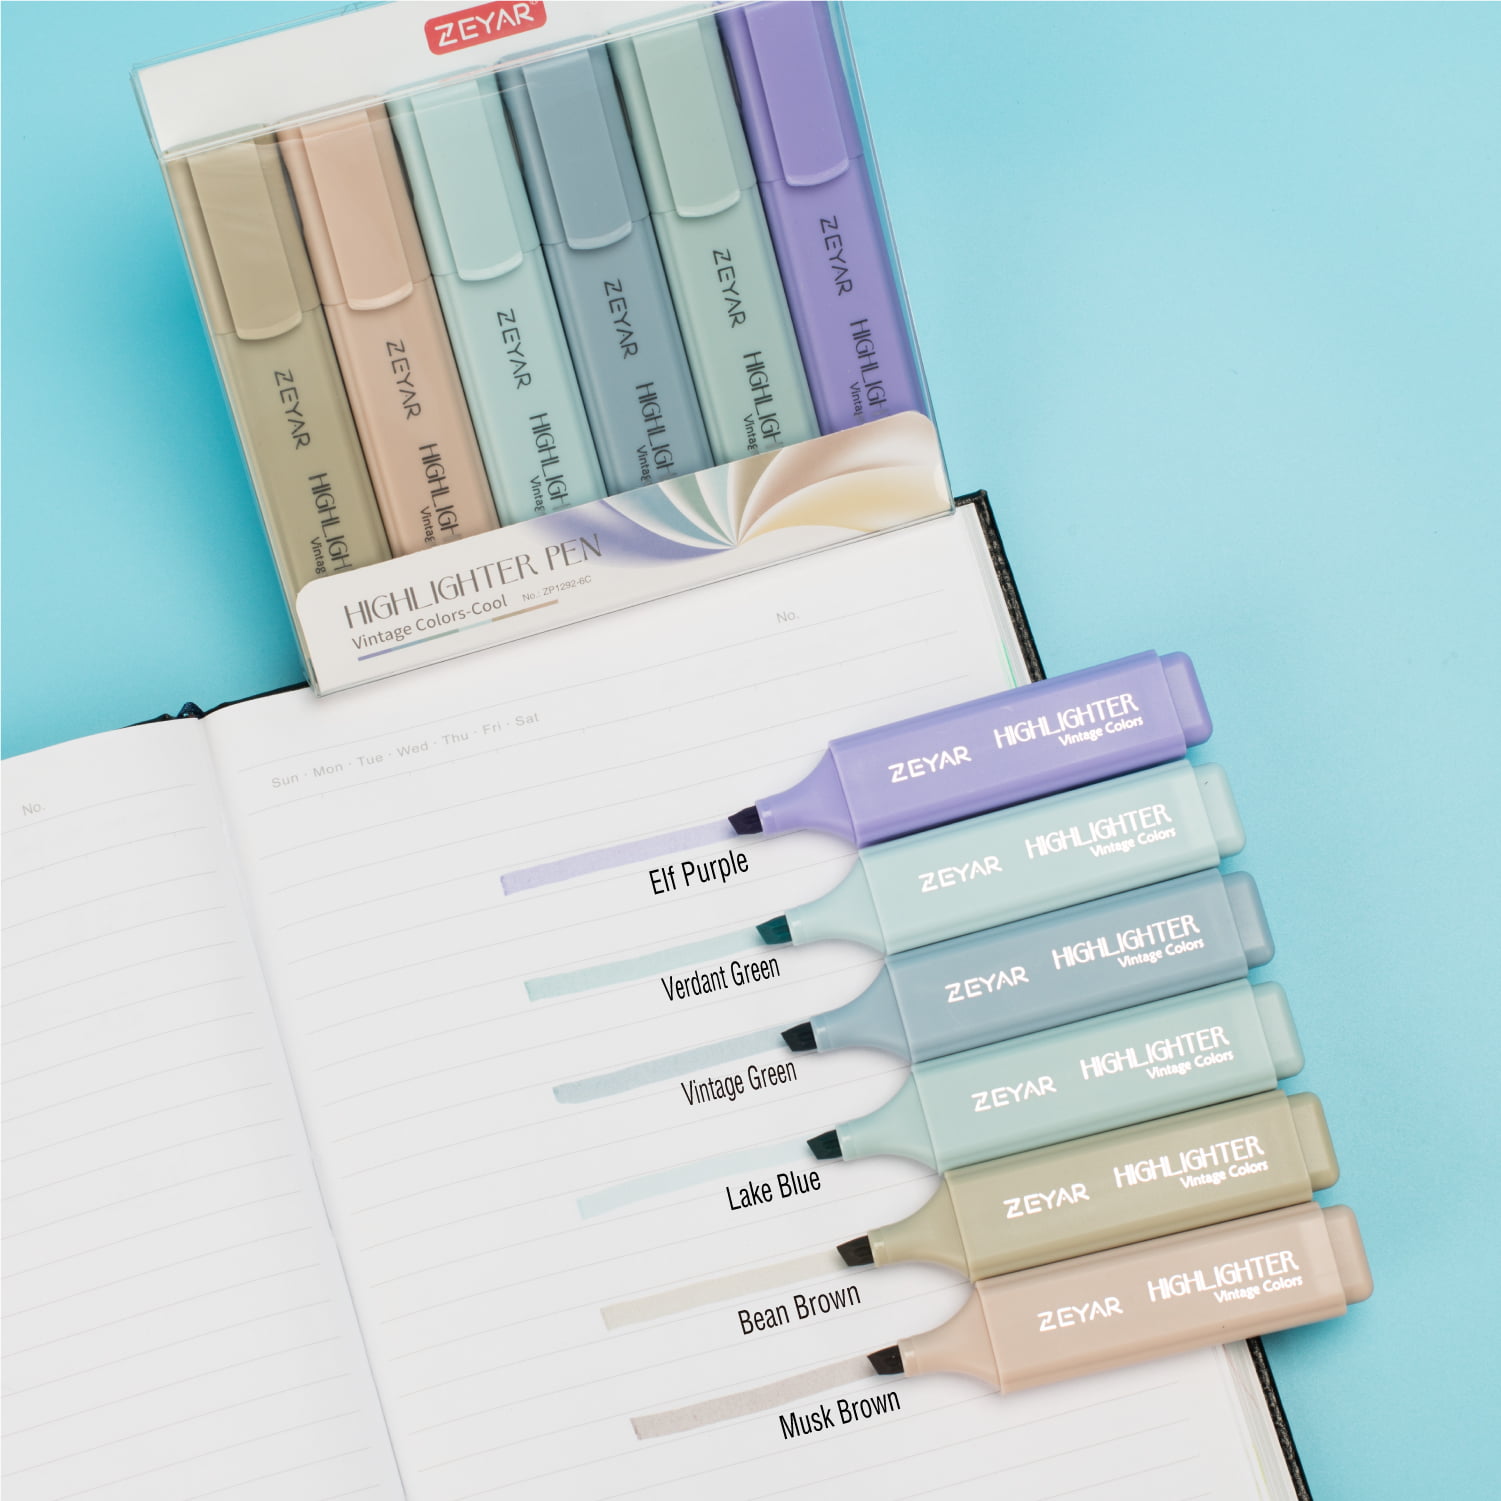 ZEYAR Cute Highlighters with Duals Tips, Vintage Colors, Chisel & Bullet Tip, Aesthetic Highlighter Marker, Journal Bible Study Notes School Office